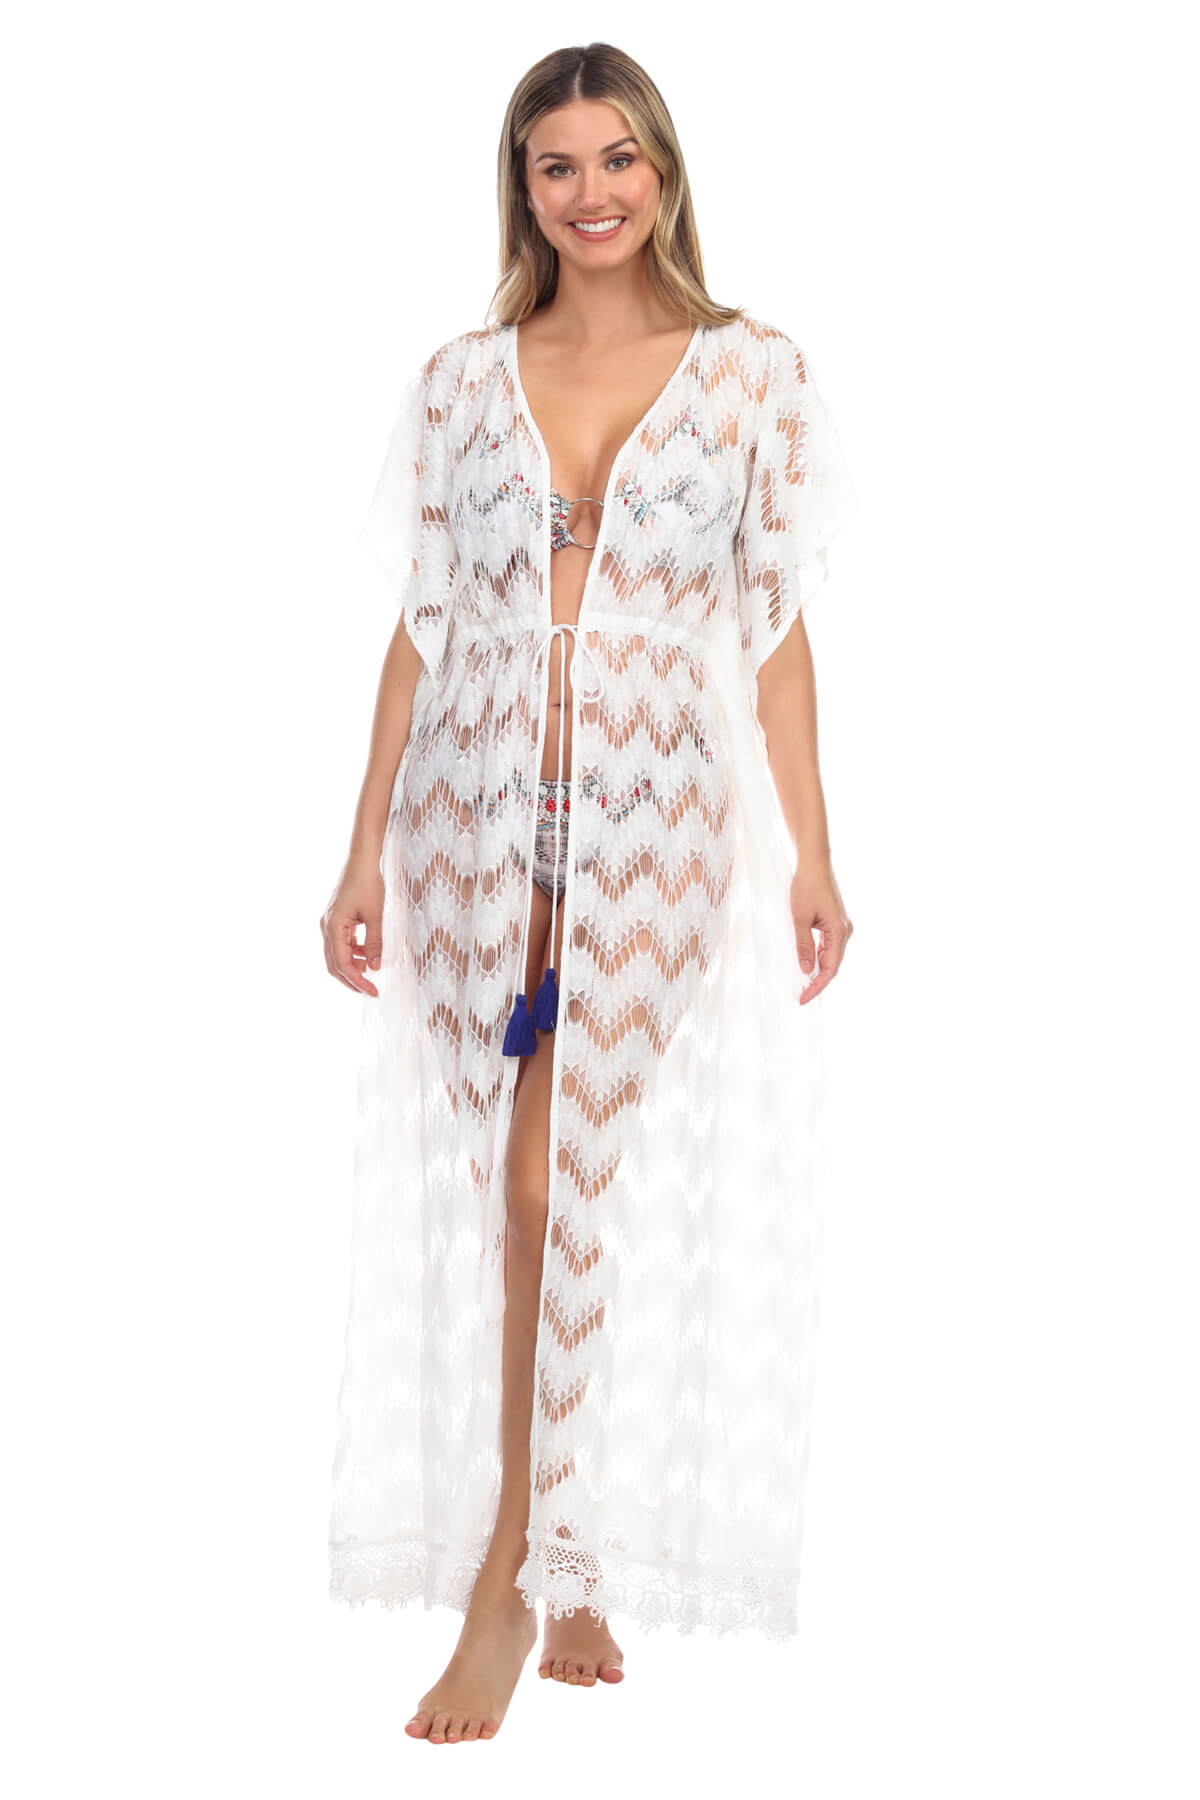 Coco Sheer Side Slits Maxi Cover Up Duster